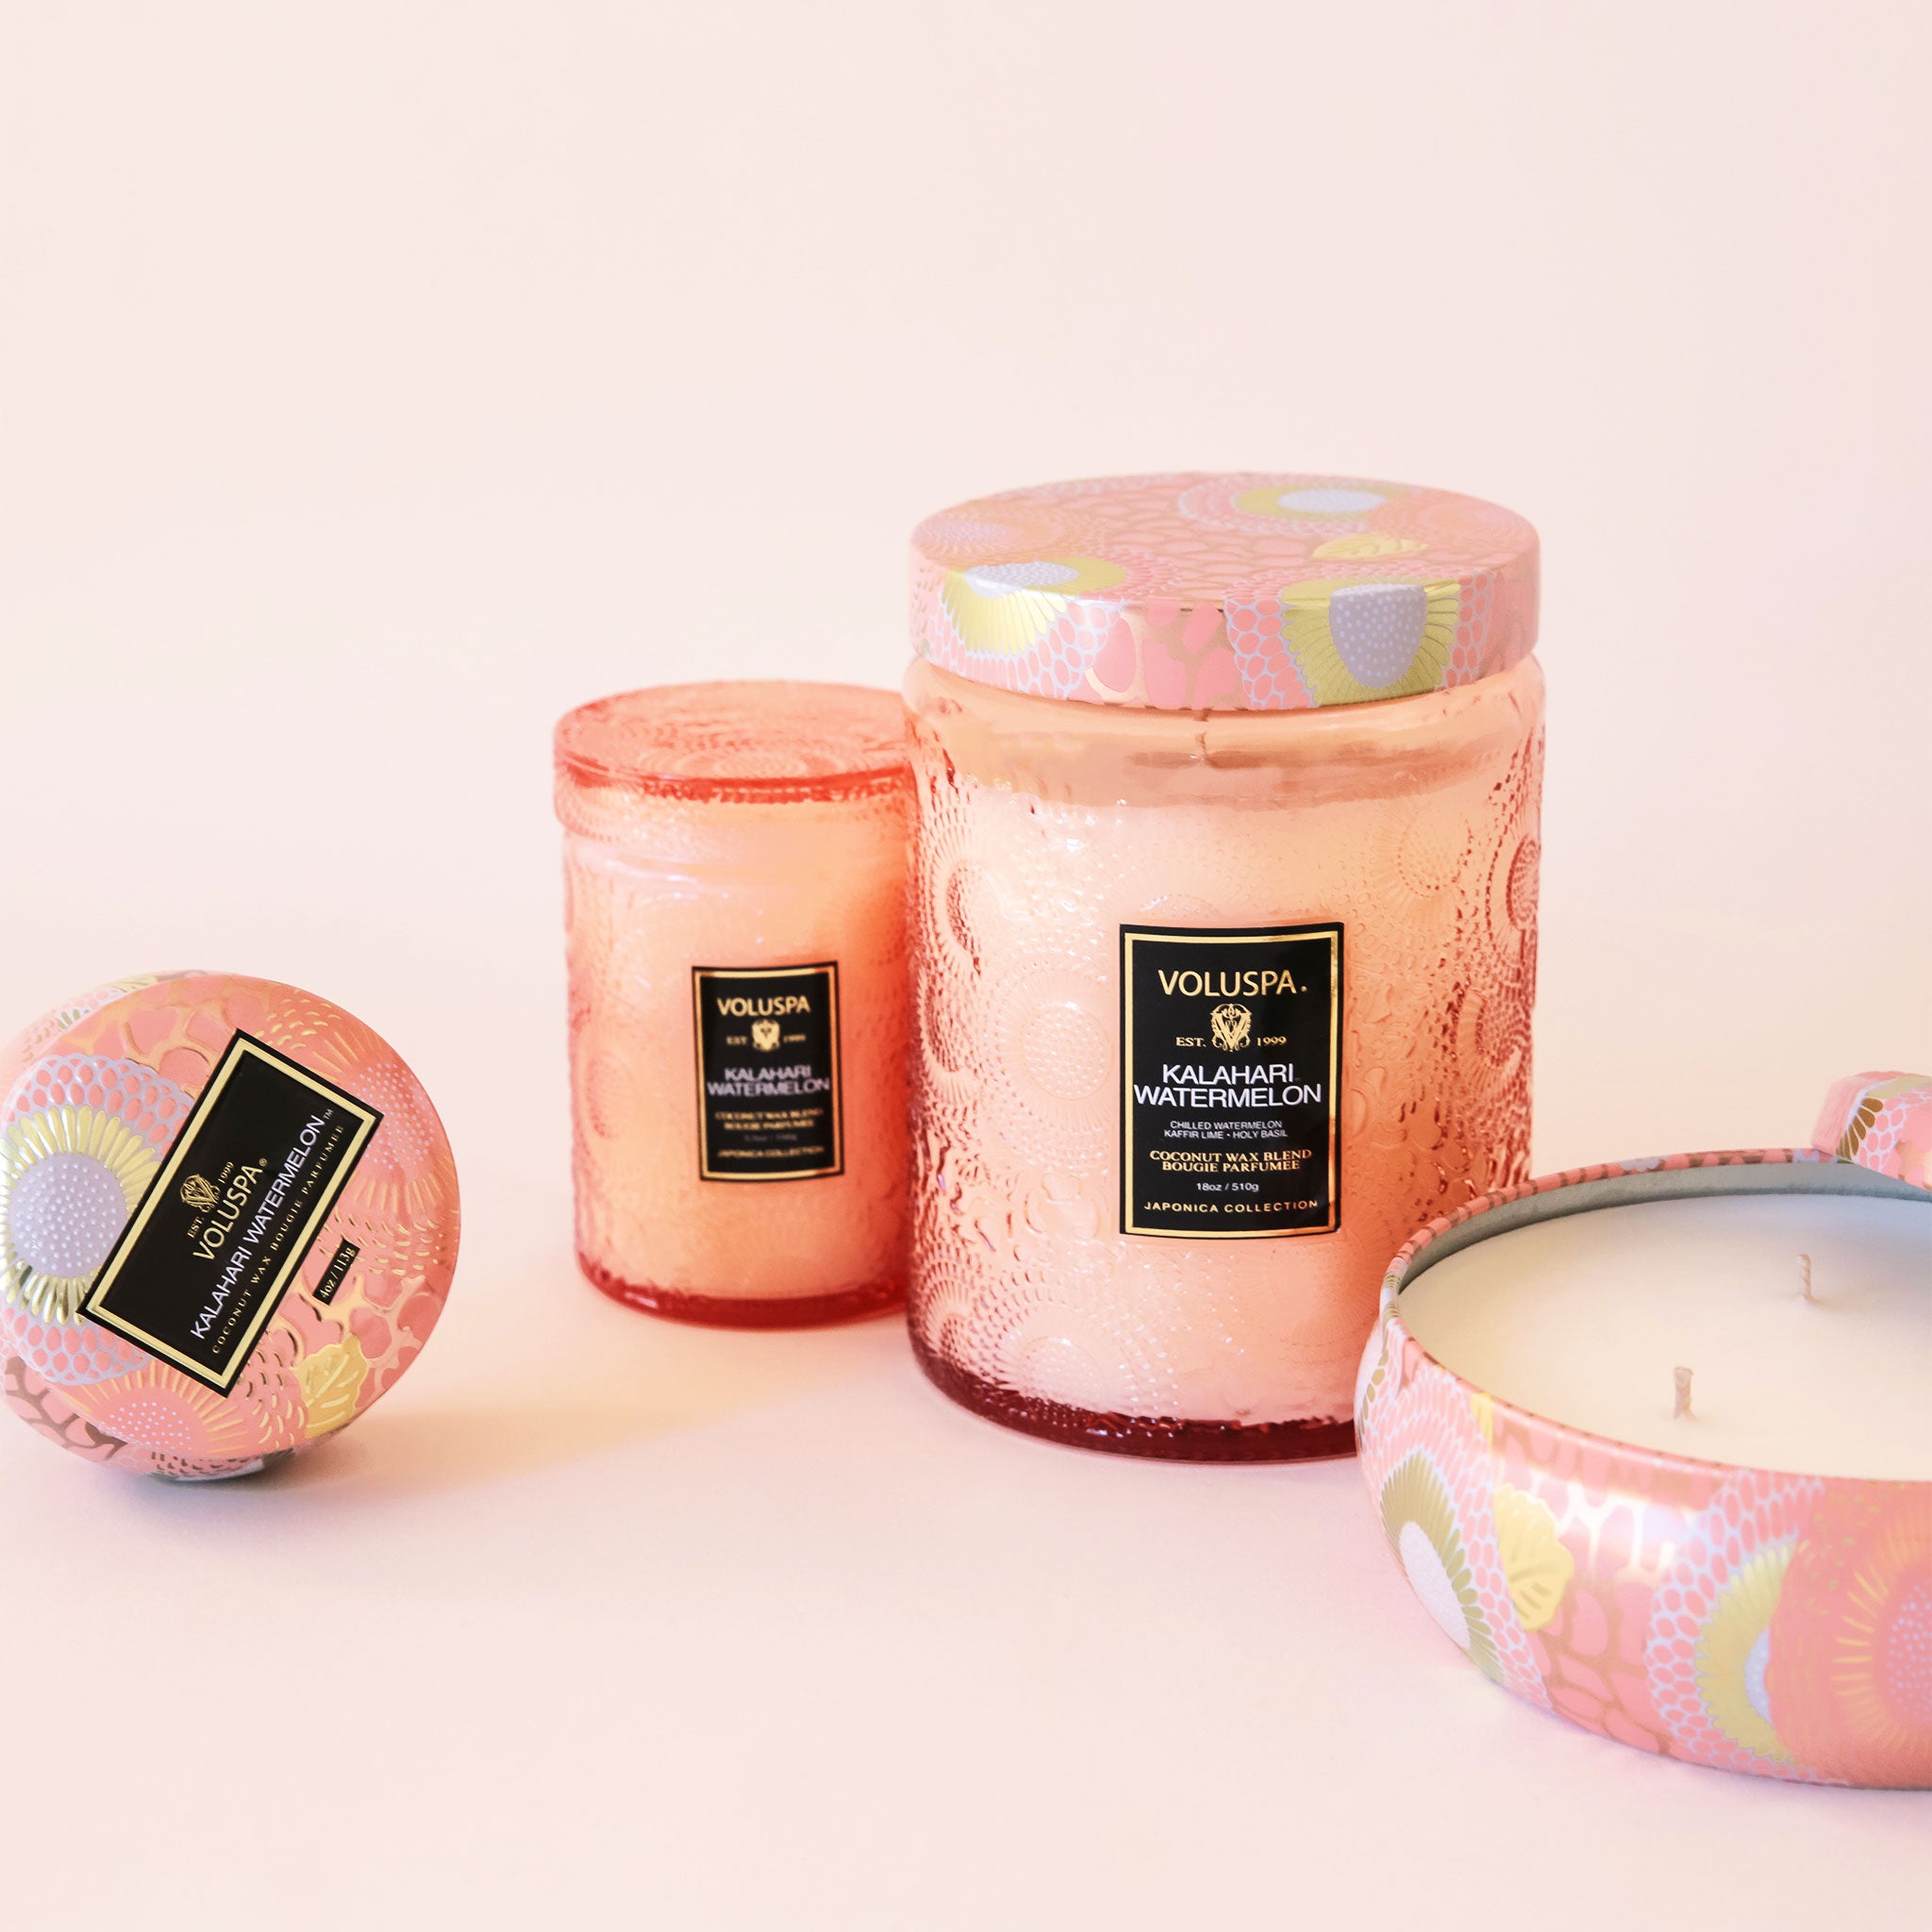 The Kalahari collection shown together with the Large Jar, small jar, 3-wick tin, and mini tin. Its colors are beautiful and the jar's glass distributes light in a romantic way.